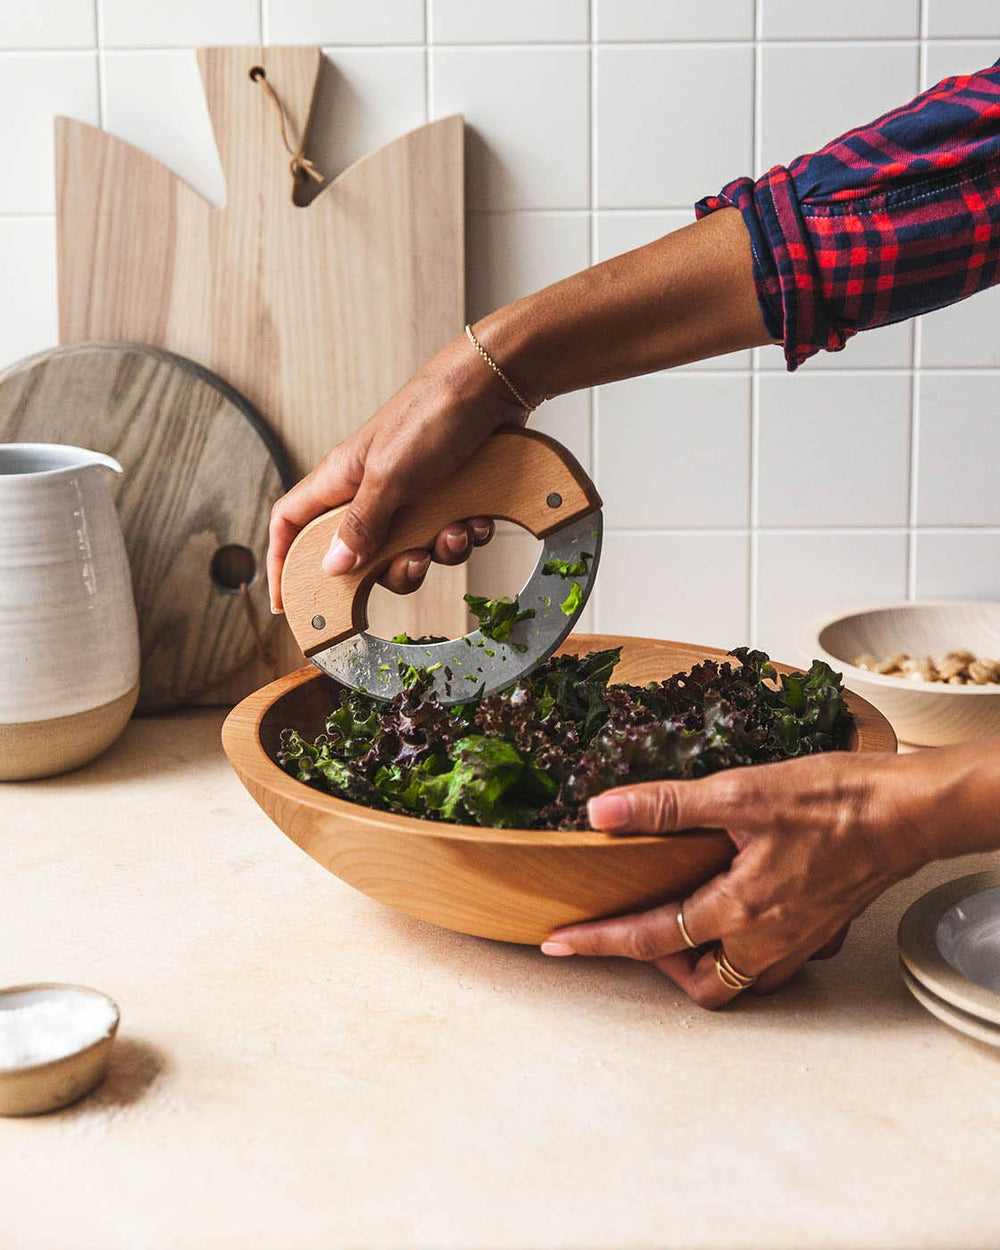 3-in-1 Salad Chopper Lets You Rinse, Chop, and Serve Salads in 60